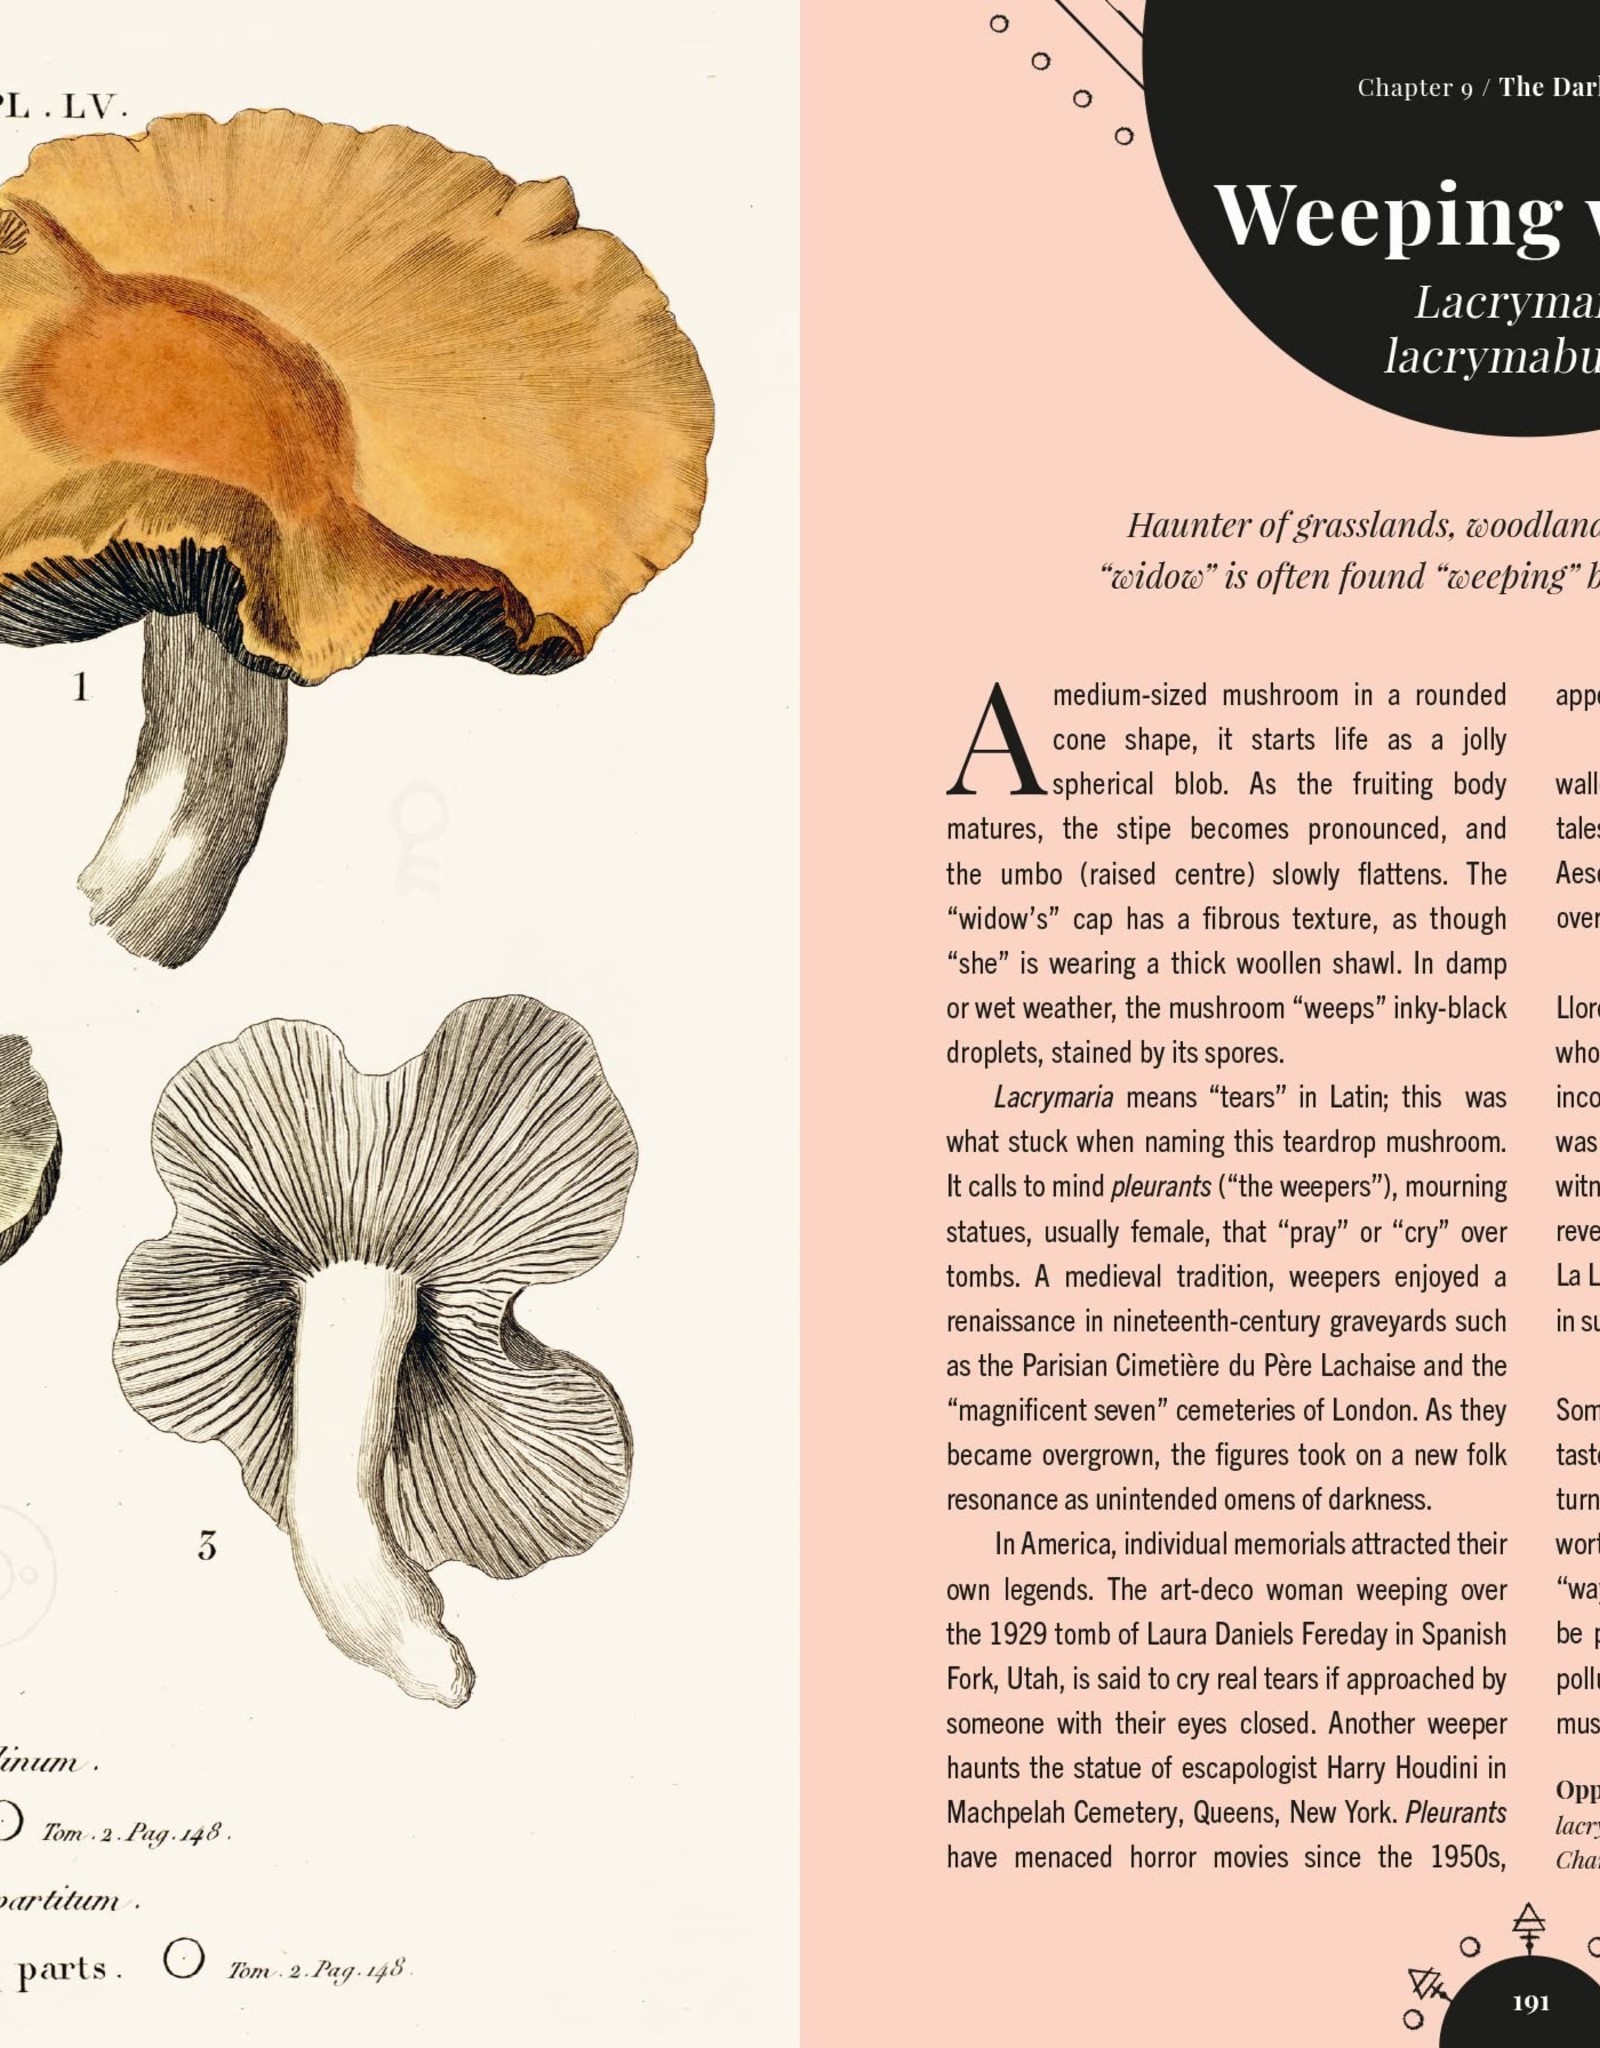 Magic of Mushrooms: Fungi in Folklore, Science and the Occult*